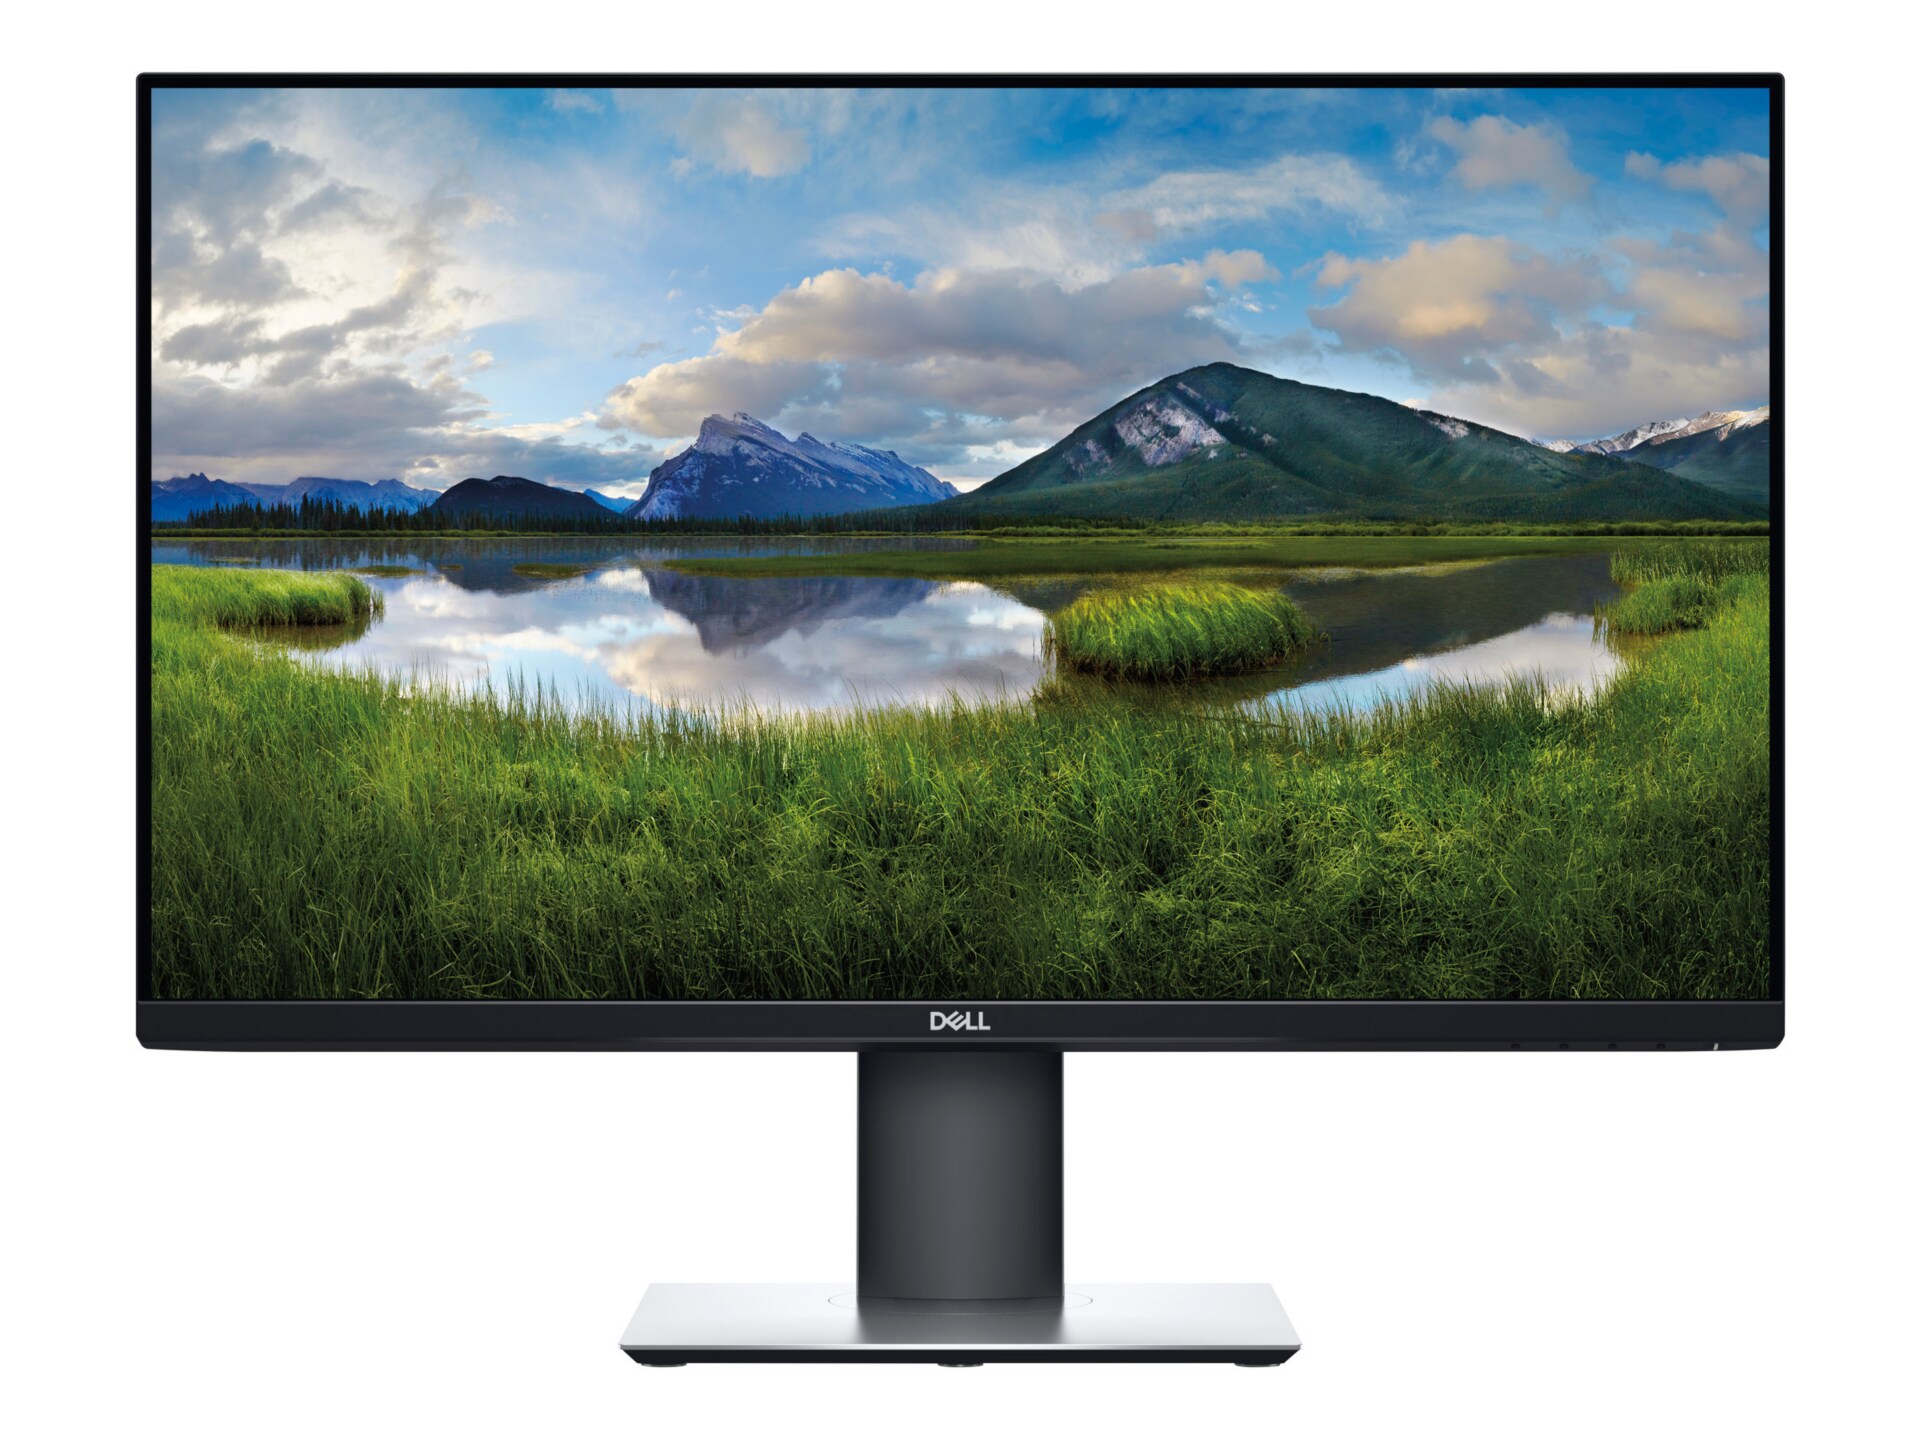 Dell P2719H - LED monitor - Full HD (1080p) - 27" - with 3 years Premium Pa